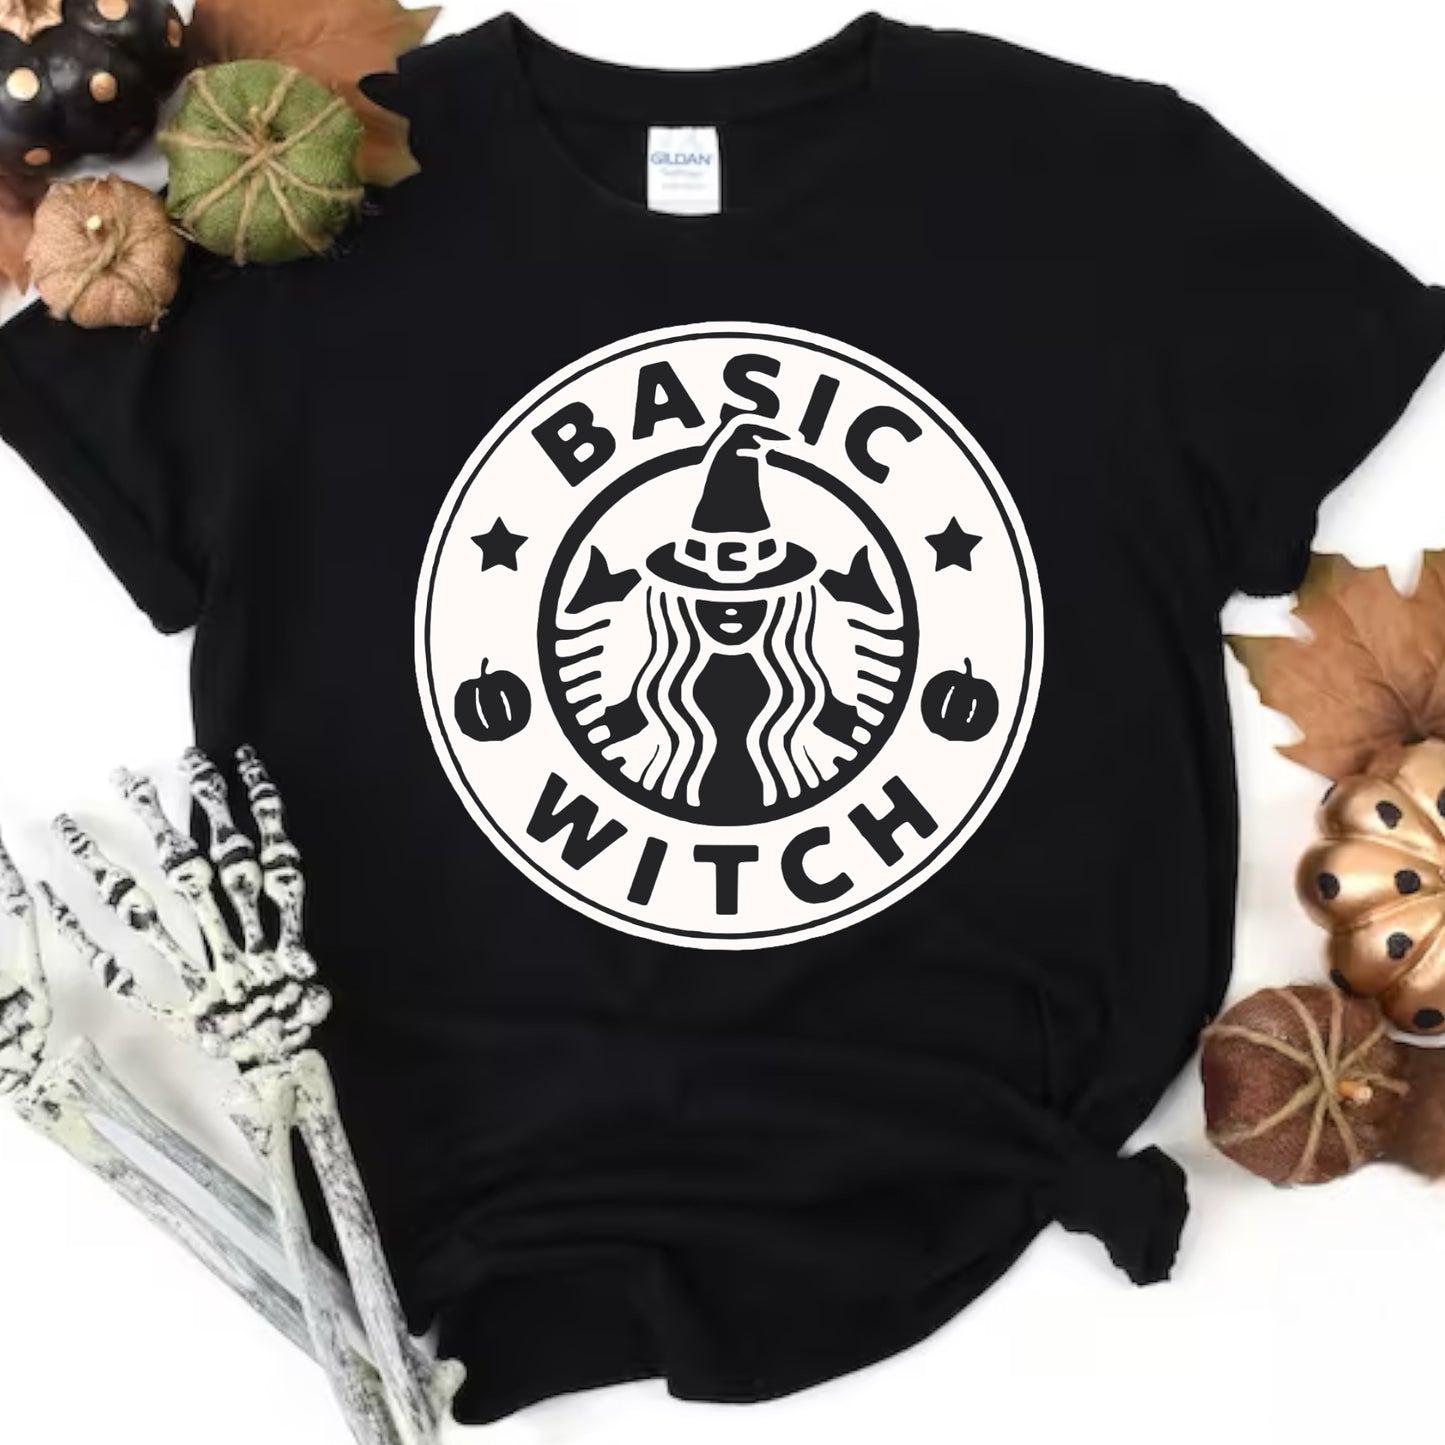 Basic Witch Tee